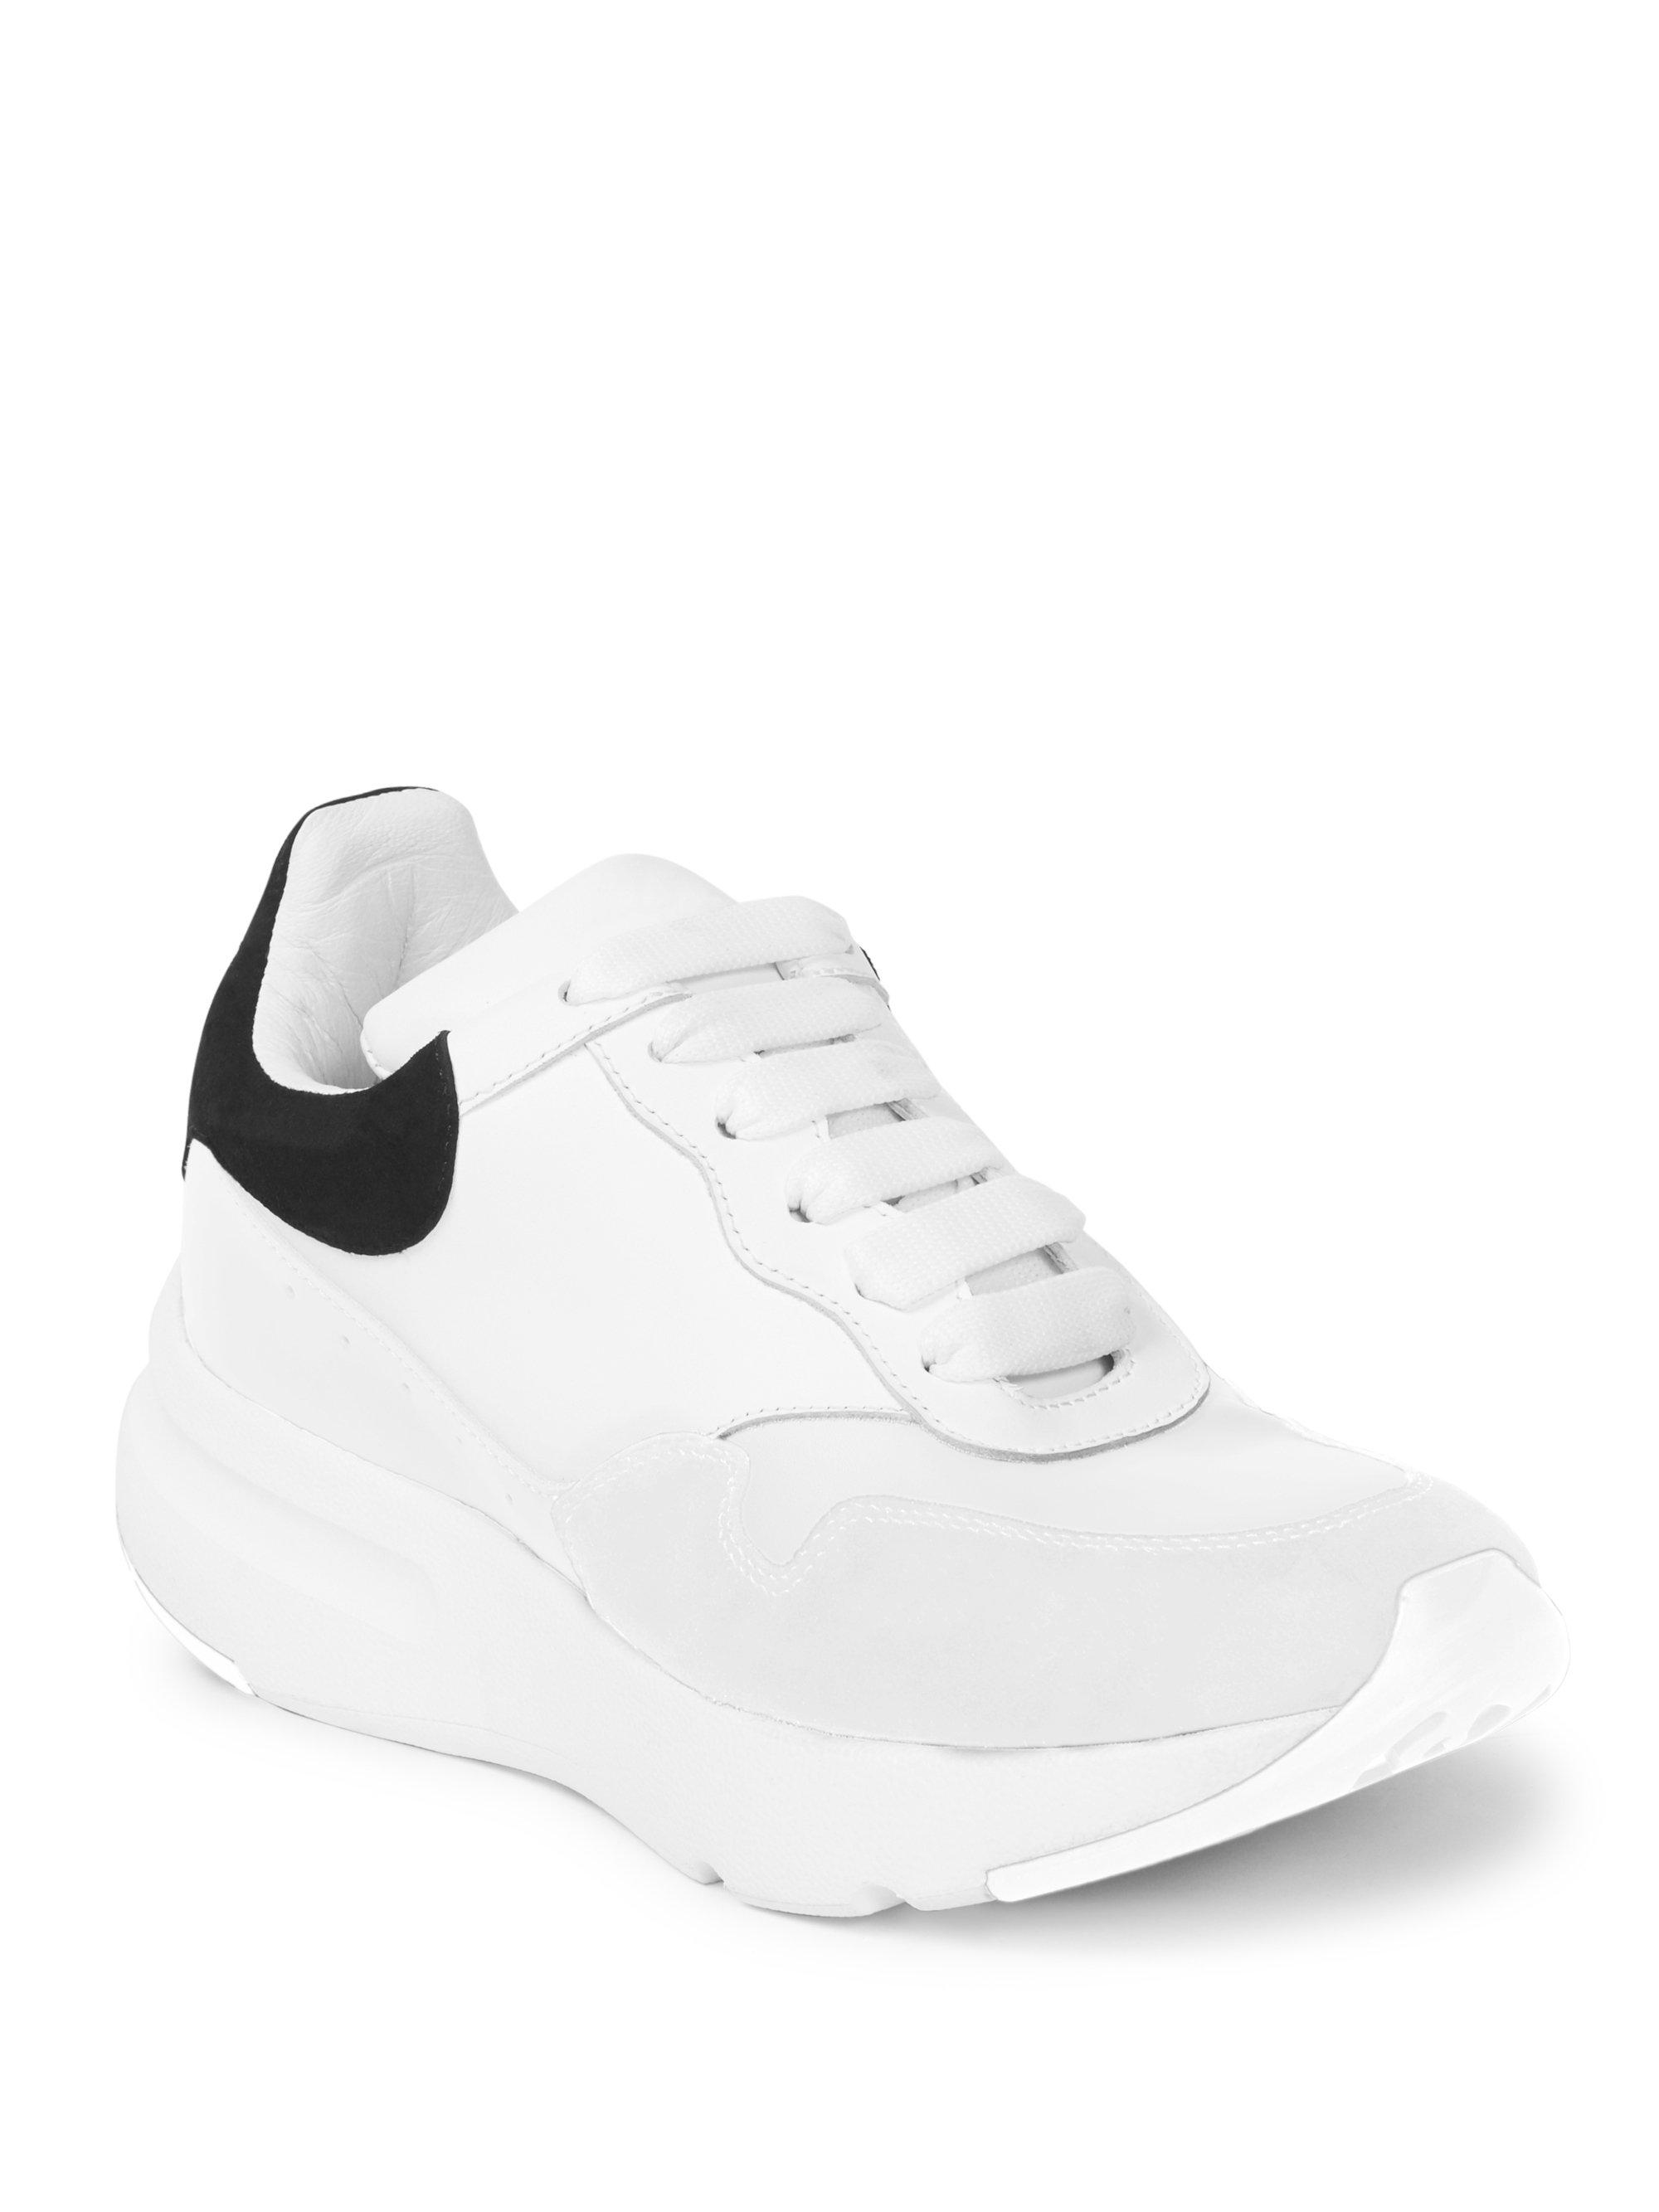 Alexander McQueen Leather & Velour Lace-up Sneakers in White-Black (White)  - Lyst